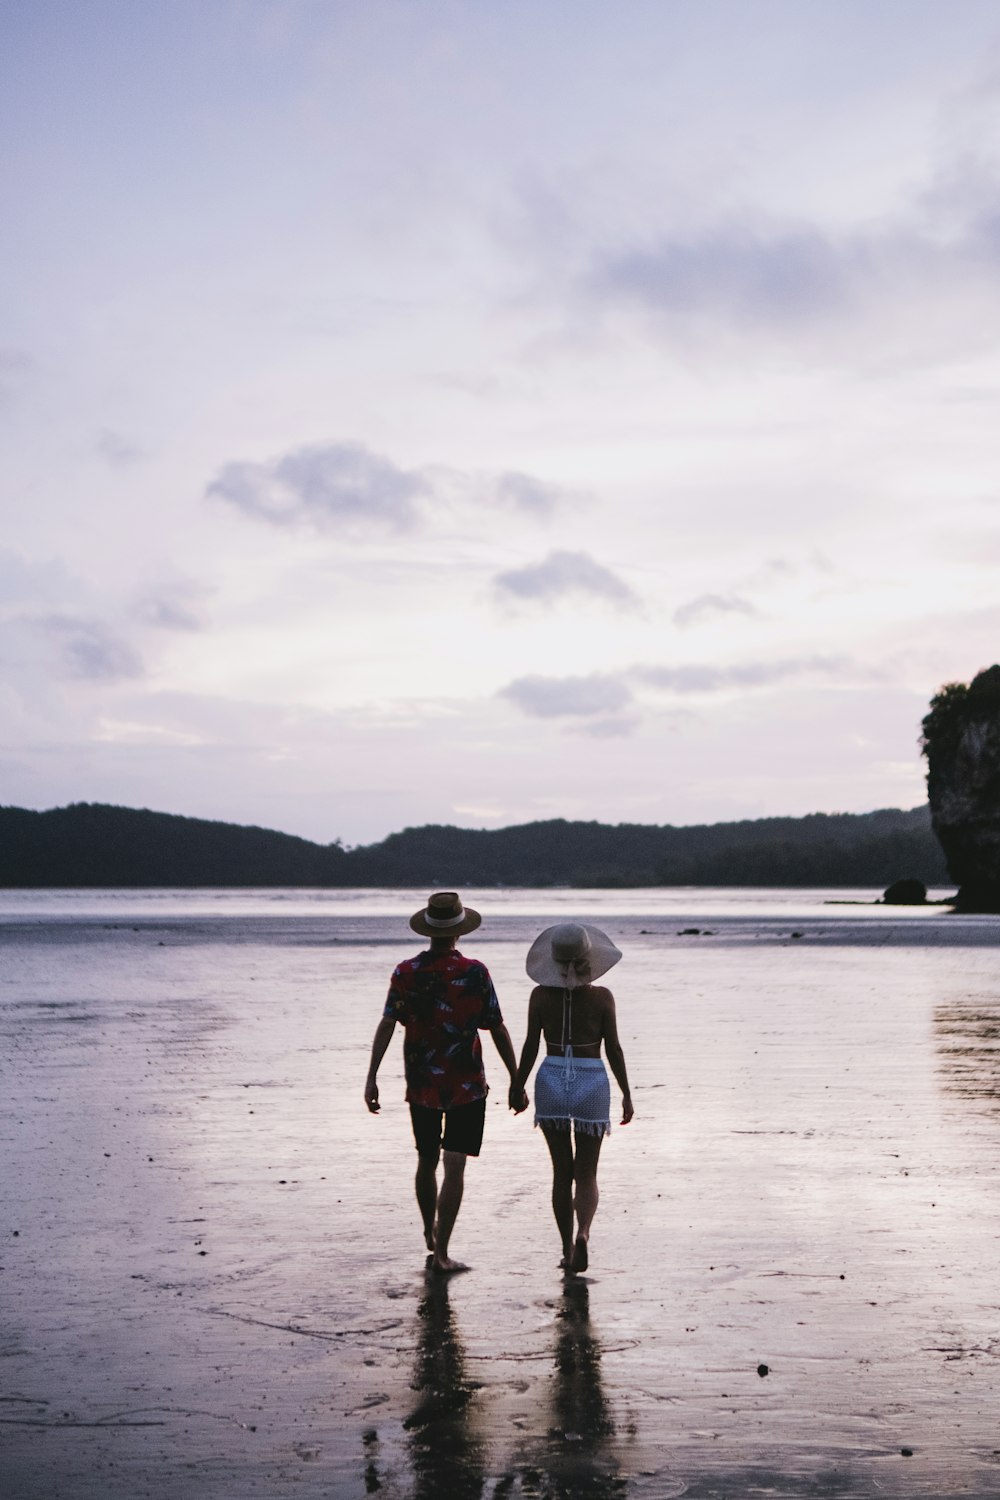 two people walking on a beach holding hands